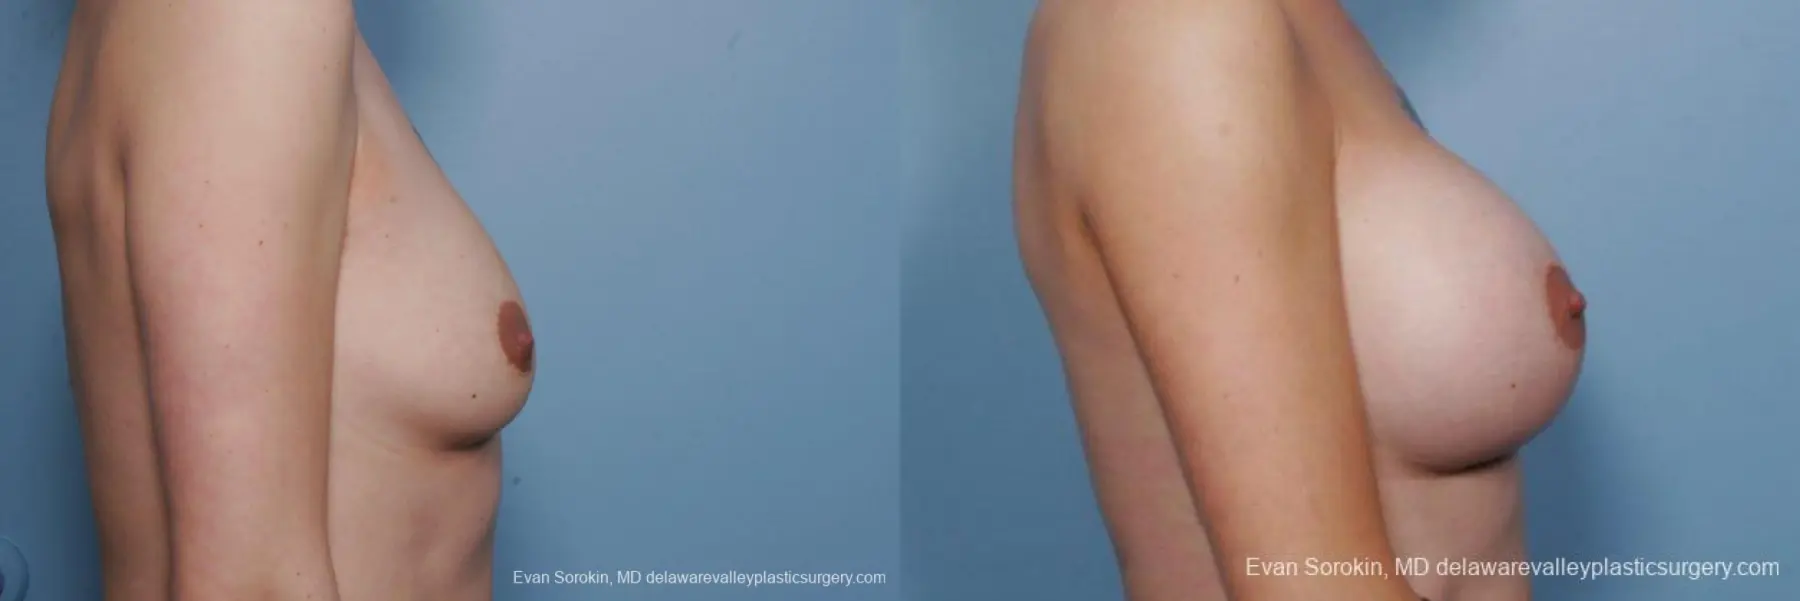 Philadelphia Breast Augmentation 9385 - Before and After 3